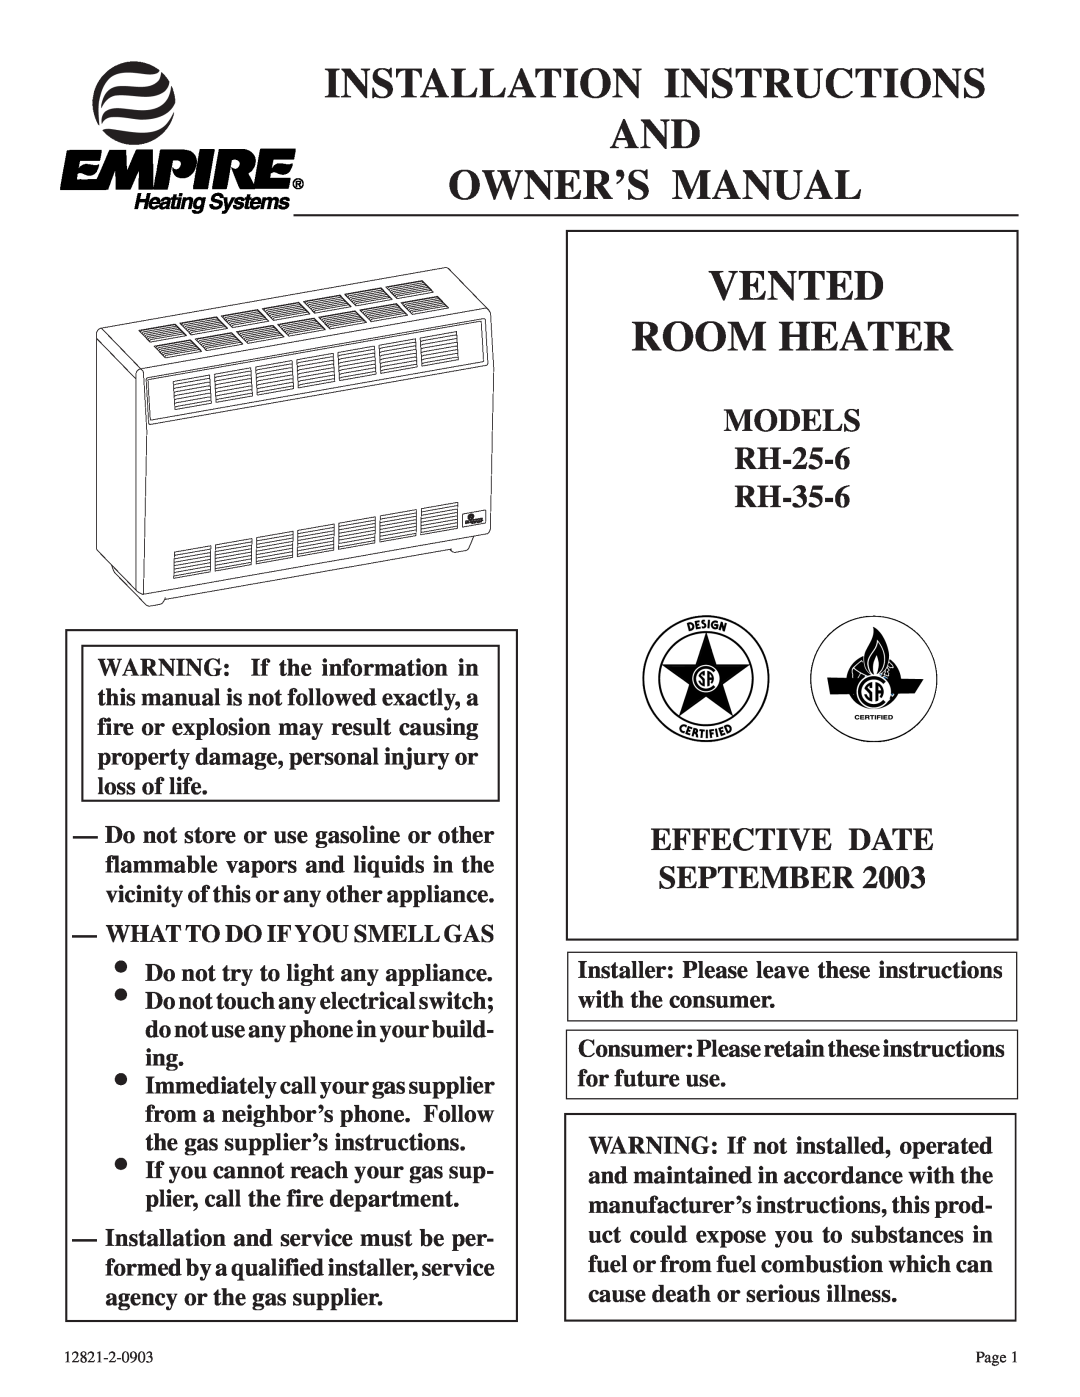 Empire Products installation instructions MODELS RH-25-6 RH-35-6 EFFECTIVE DATE SEPTEMBER, Vented Room Heater 